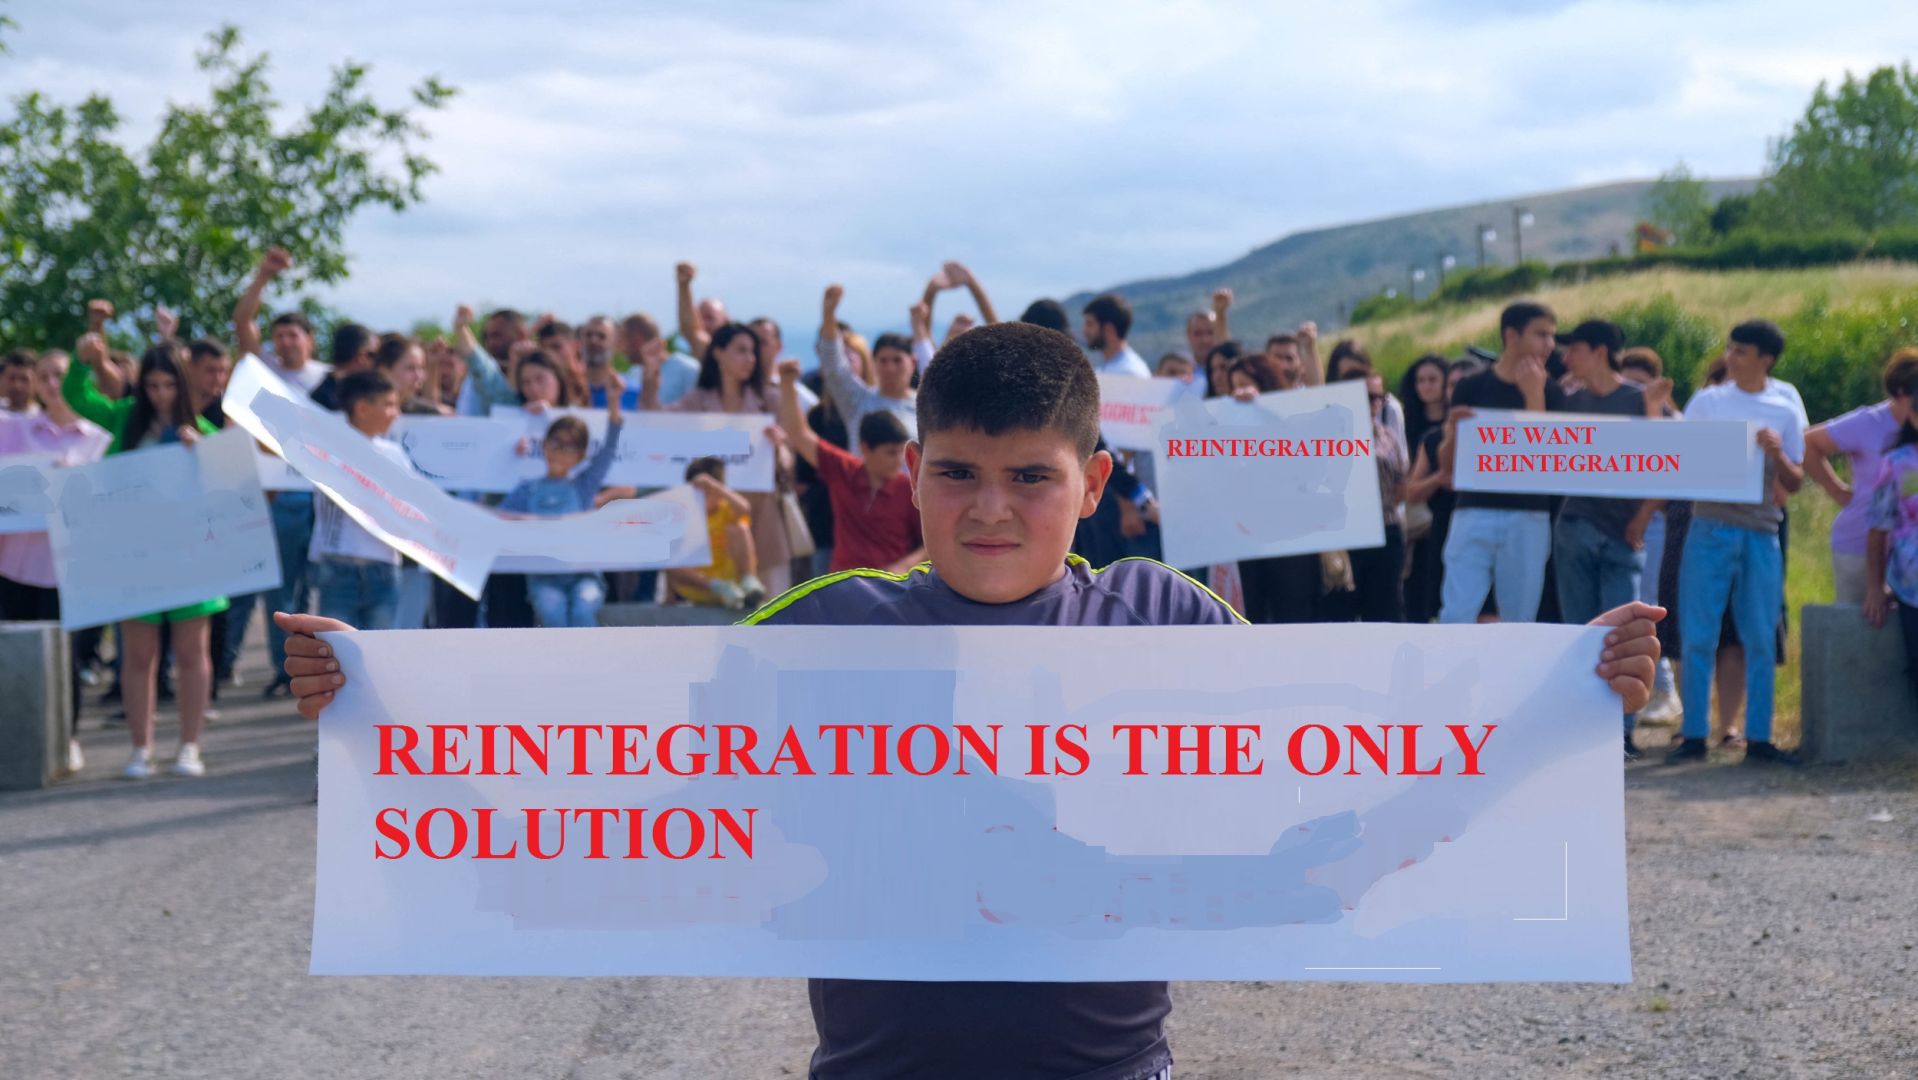 At last, Armenians understand reintegration is only solution